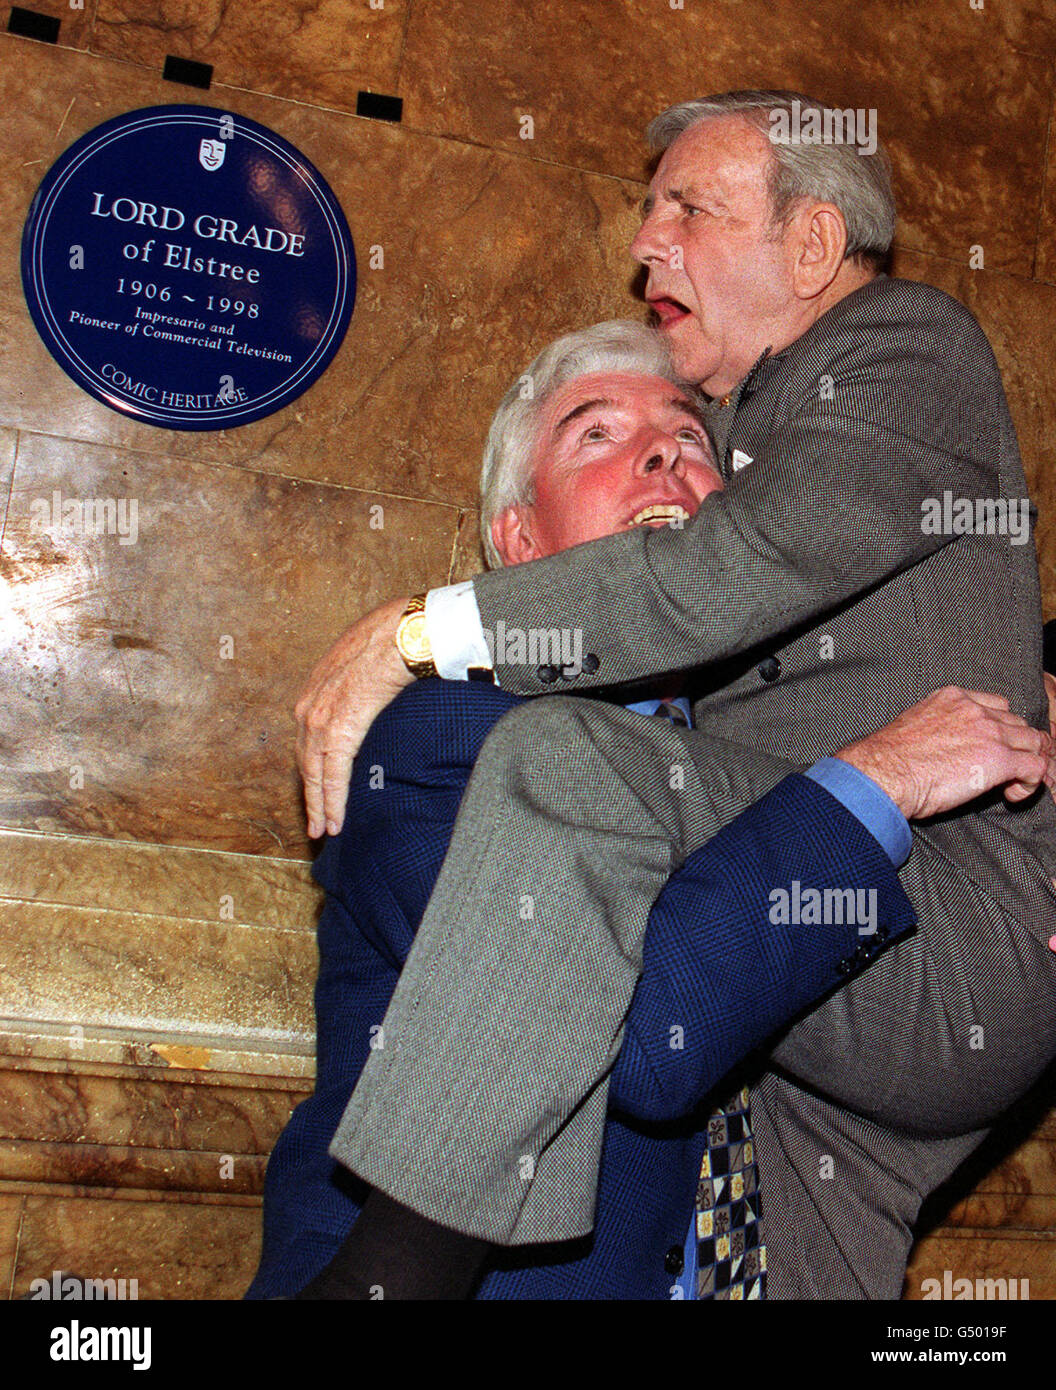 Comedian Sir Norman Wisdom uses fellow comedian Tom O'Connor to get a better view of a blue plaque unveiled in honour of Lord Grade at the London Palladium. The plaque, from Comic Heritage, was laid in recognition of Lew Grade's unique contribution to British Comedy and entertainment. Stock Photo